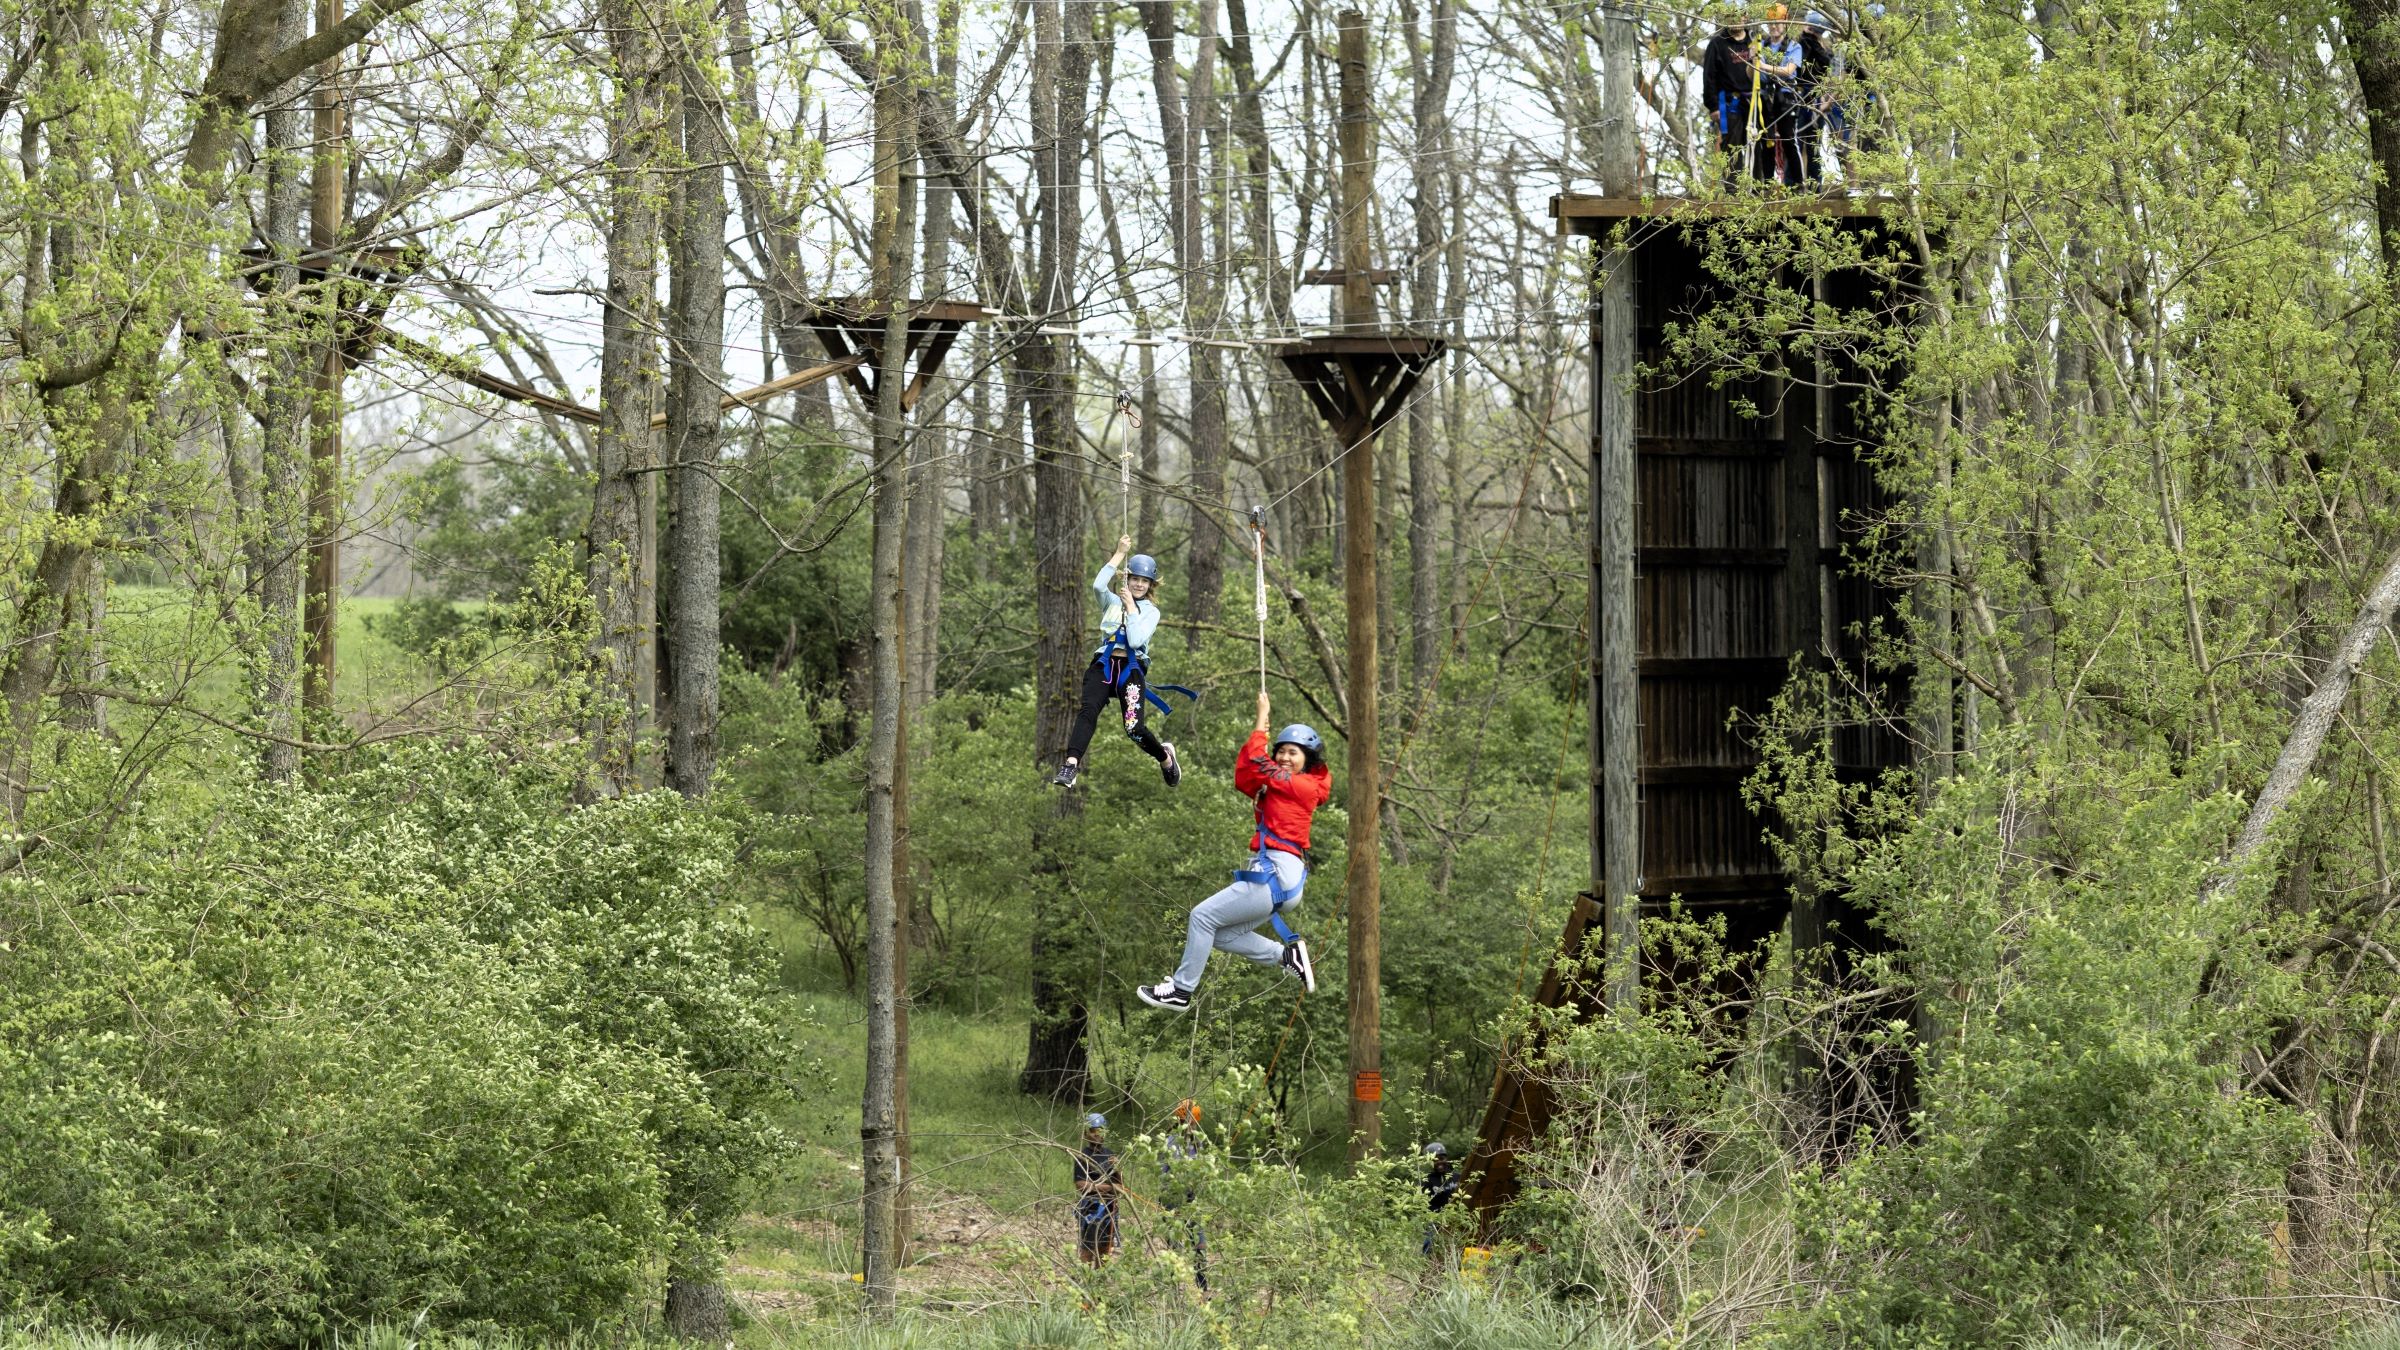 Students gliding on the zip line at Life Adventure Center. Photo by Sabrina Hounshell.